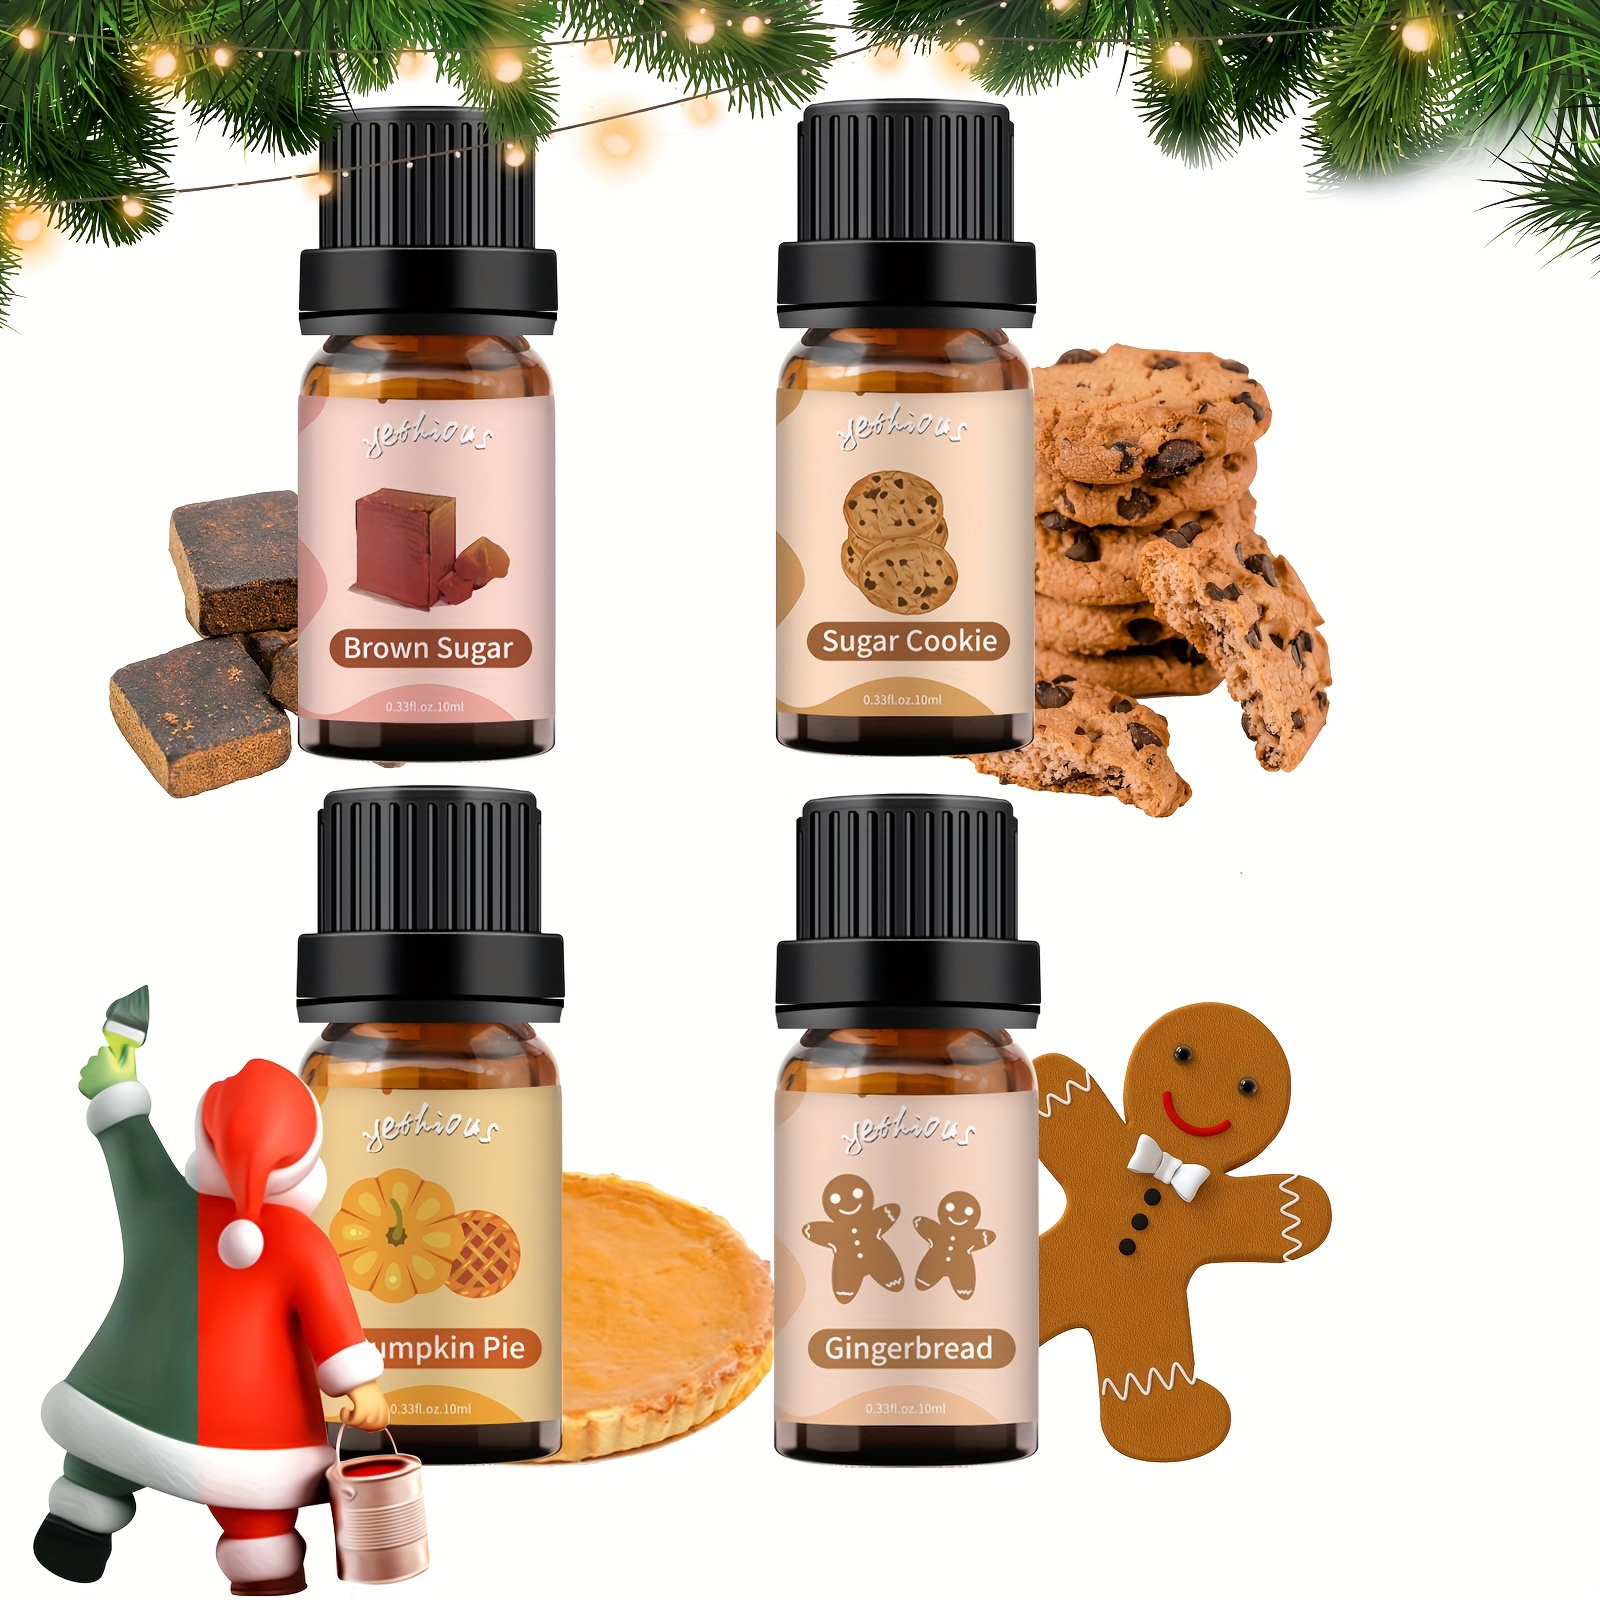  Bakery Essential Oils Set - Fragrance Oil For Diffusers,  Candle Making - Pumpkin Pie, Coffee Cake, Oatmeal Cookie, Gingerbread,  Cinnamon Apple Aromatherapy Scented Oils